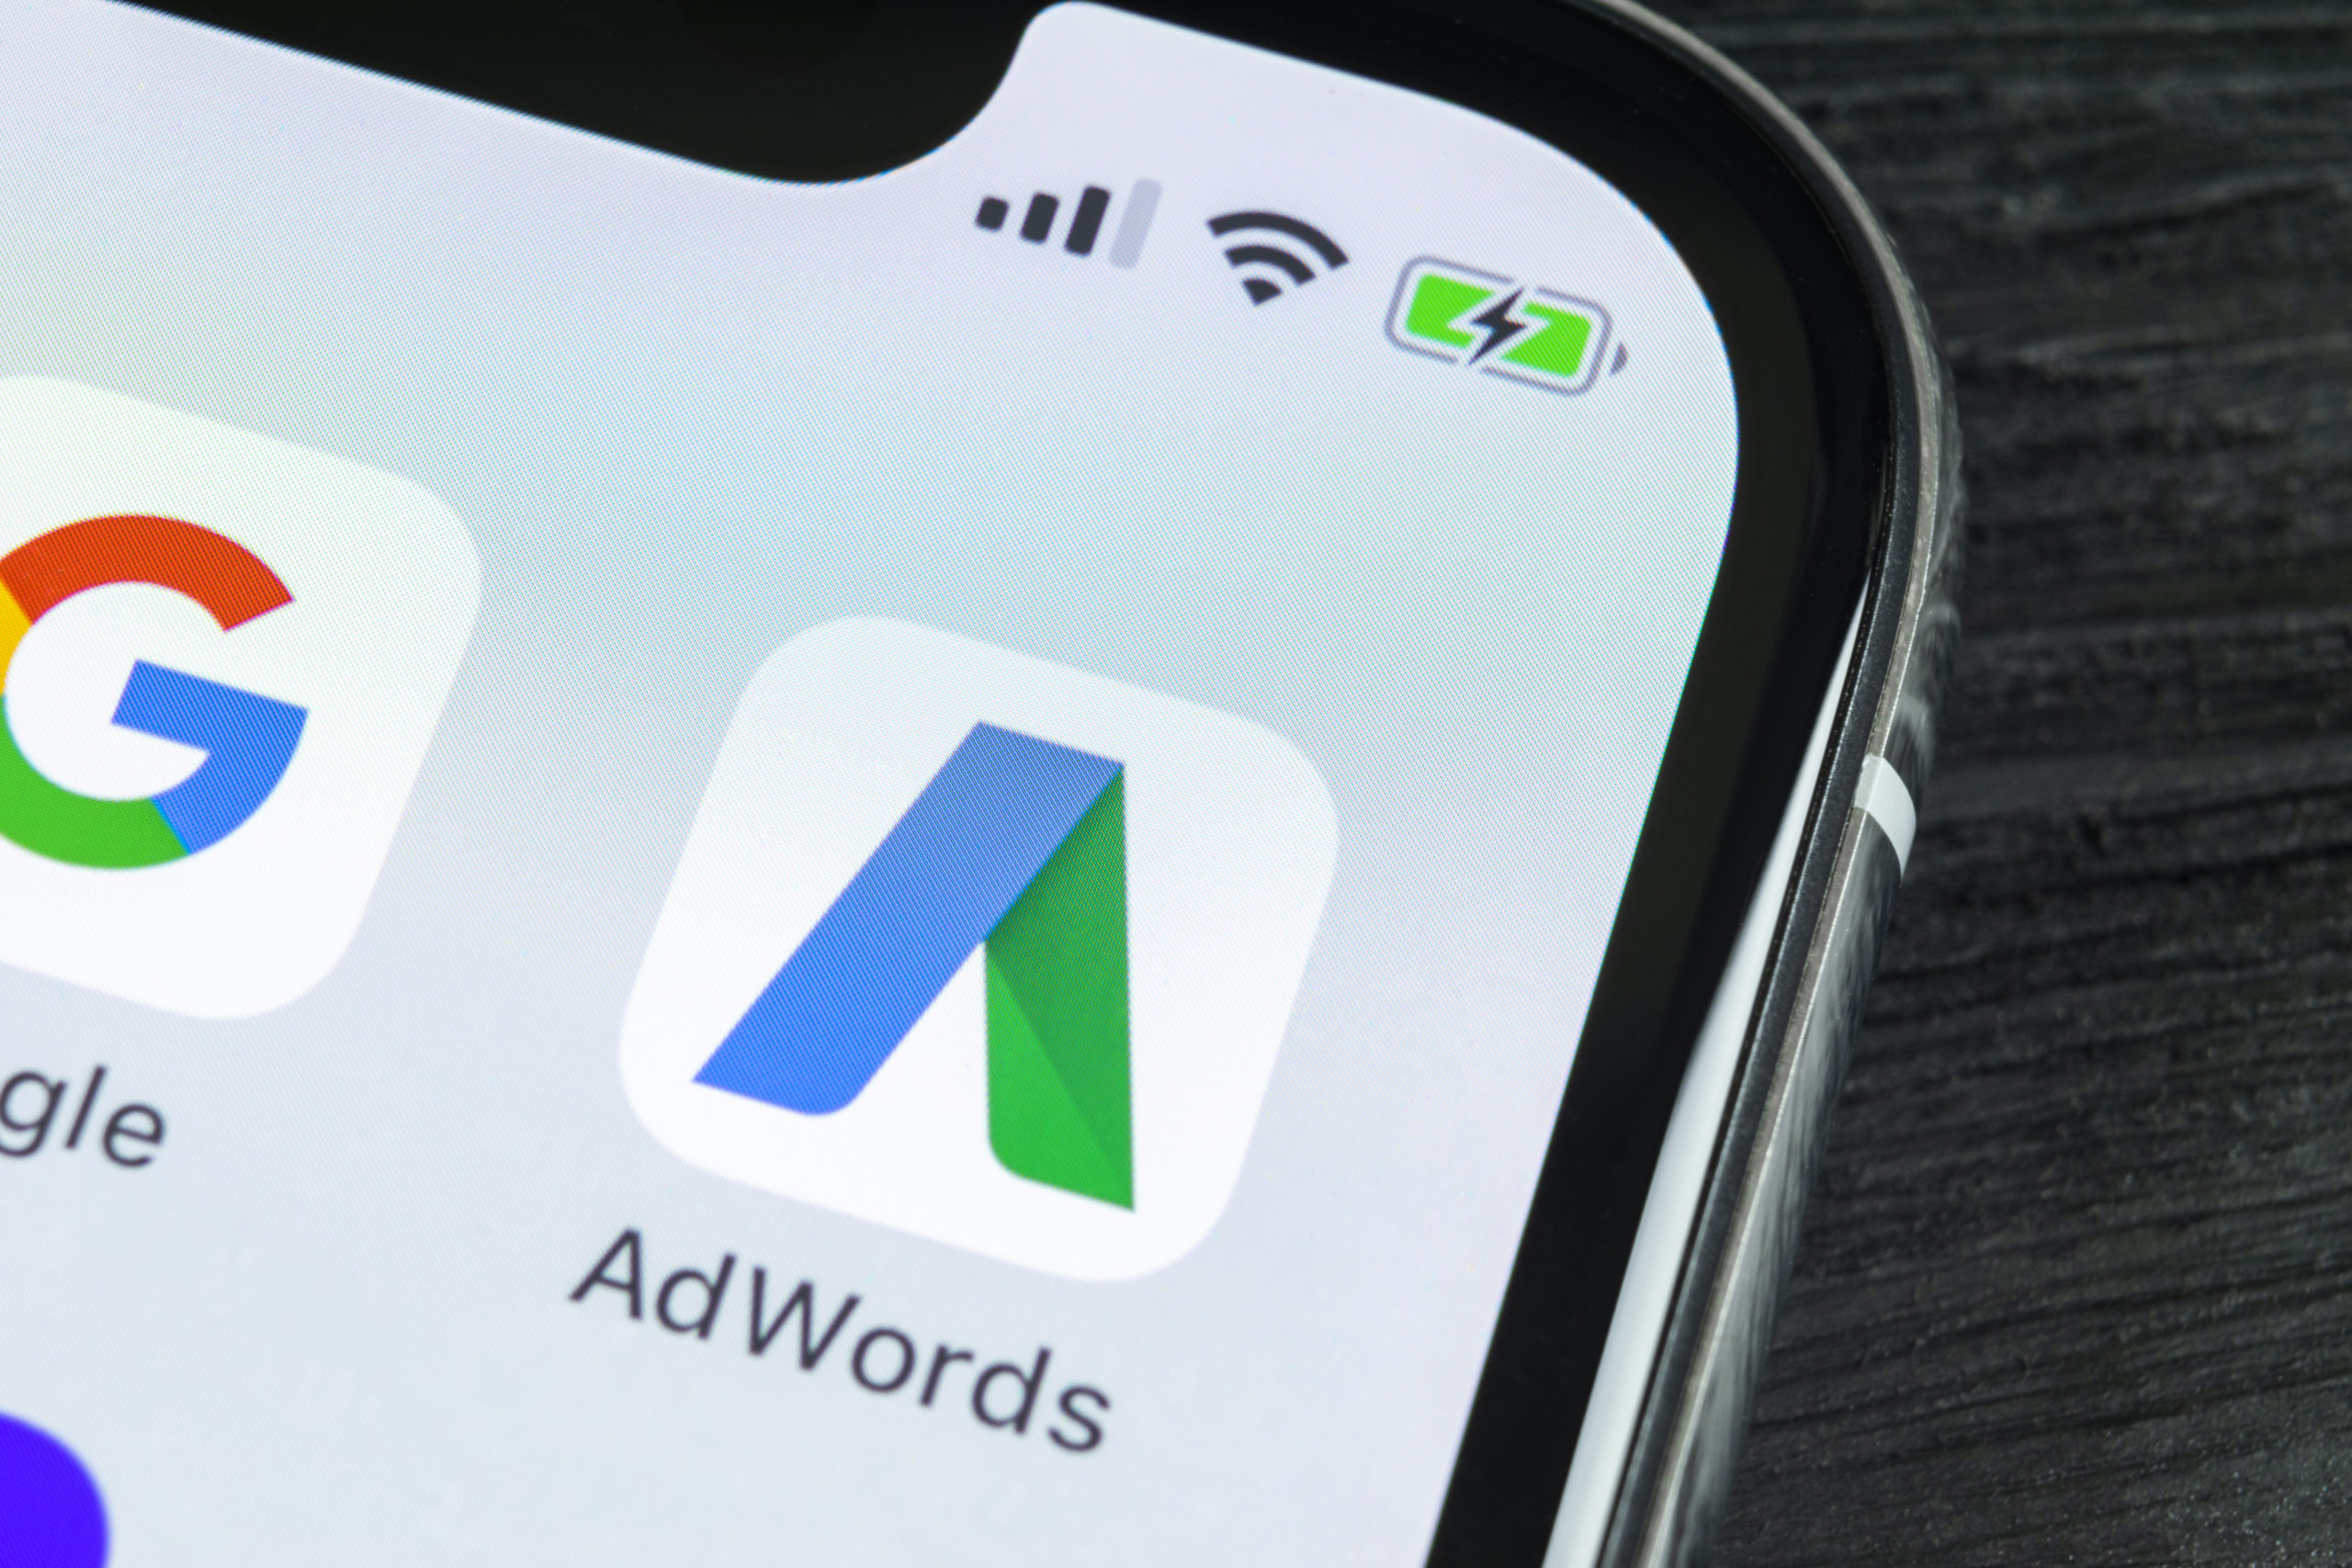 Adwords: Ad All About it